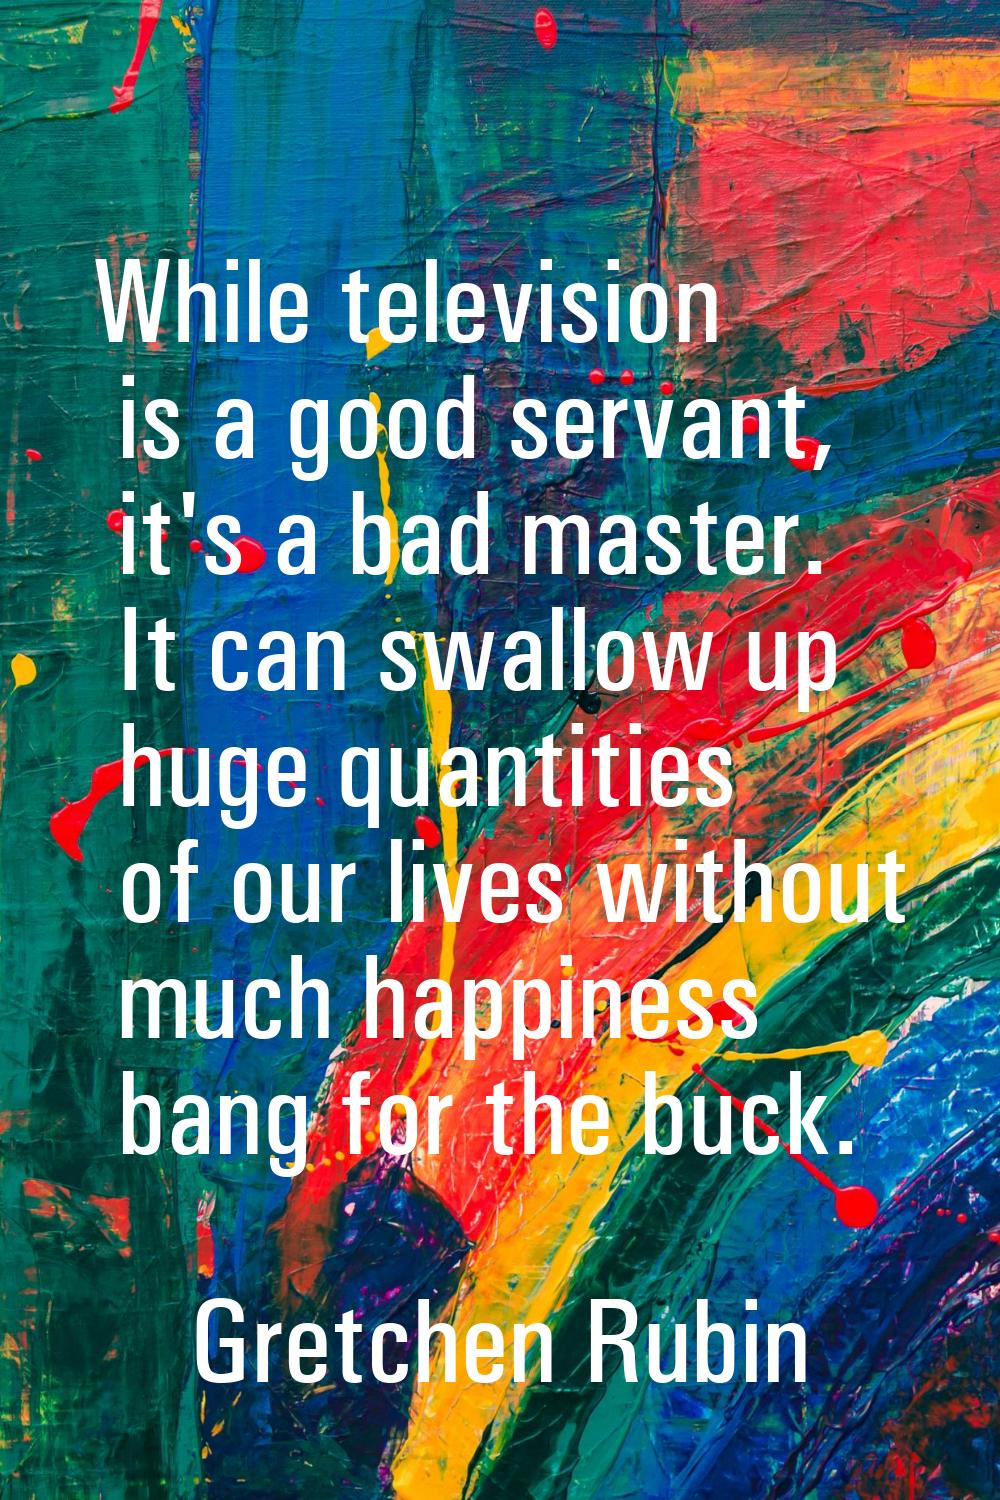 While television is a good servant, it's a bad master. It can swallow up huge quantities of our liv